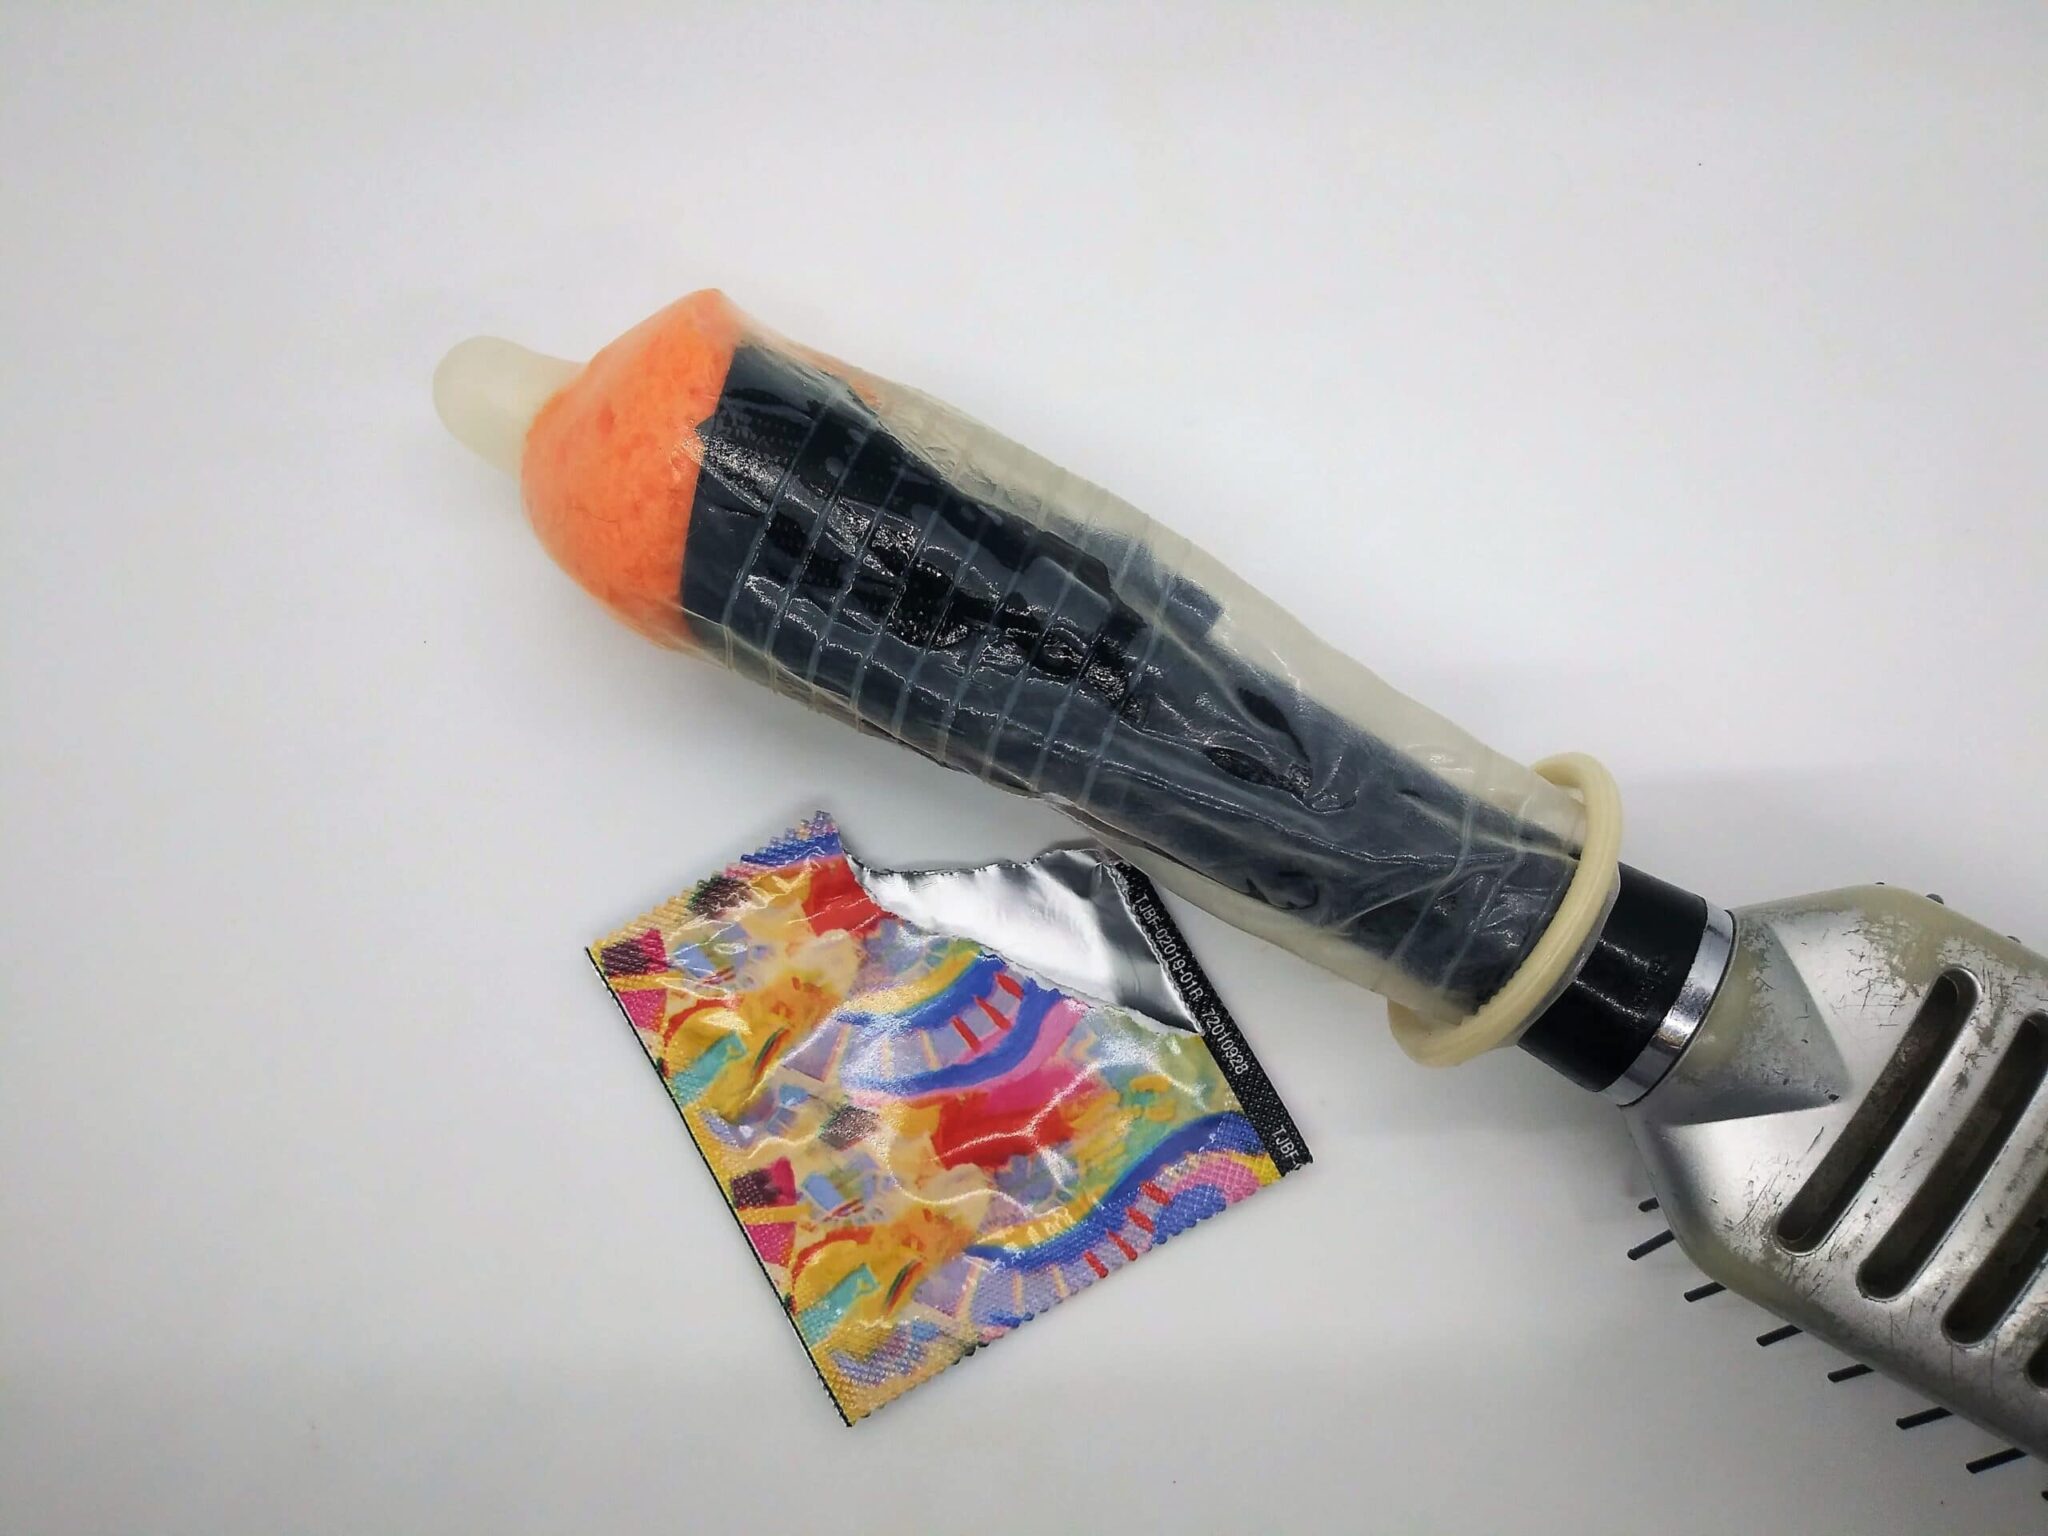 DIY anal sex toy from a hairbrush, photo of the hairbrush handle covered with a condom.